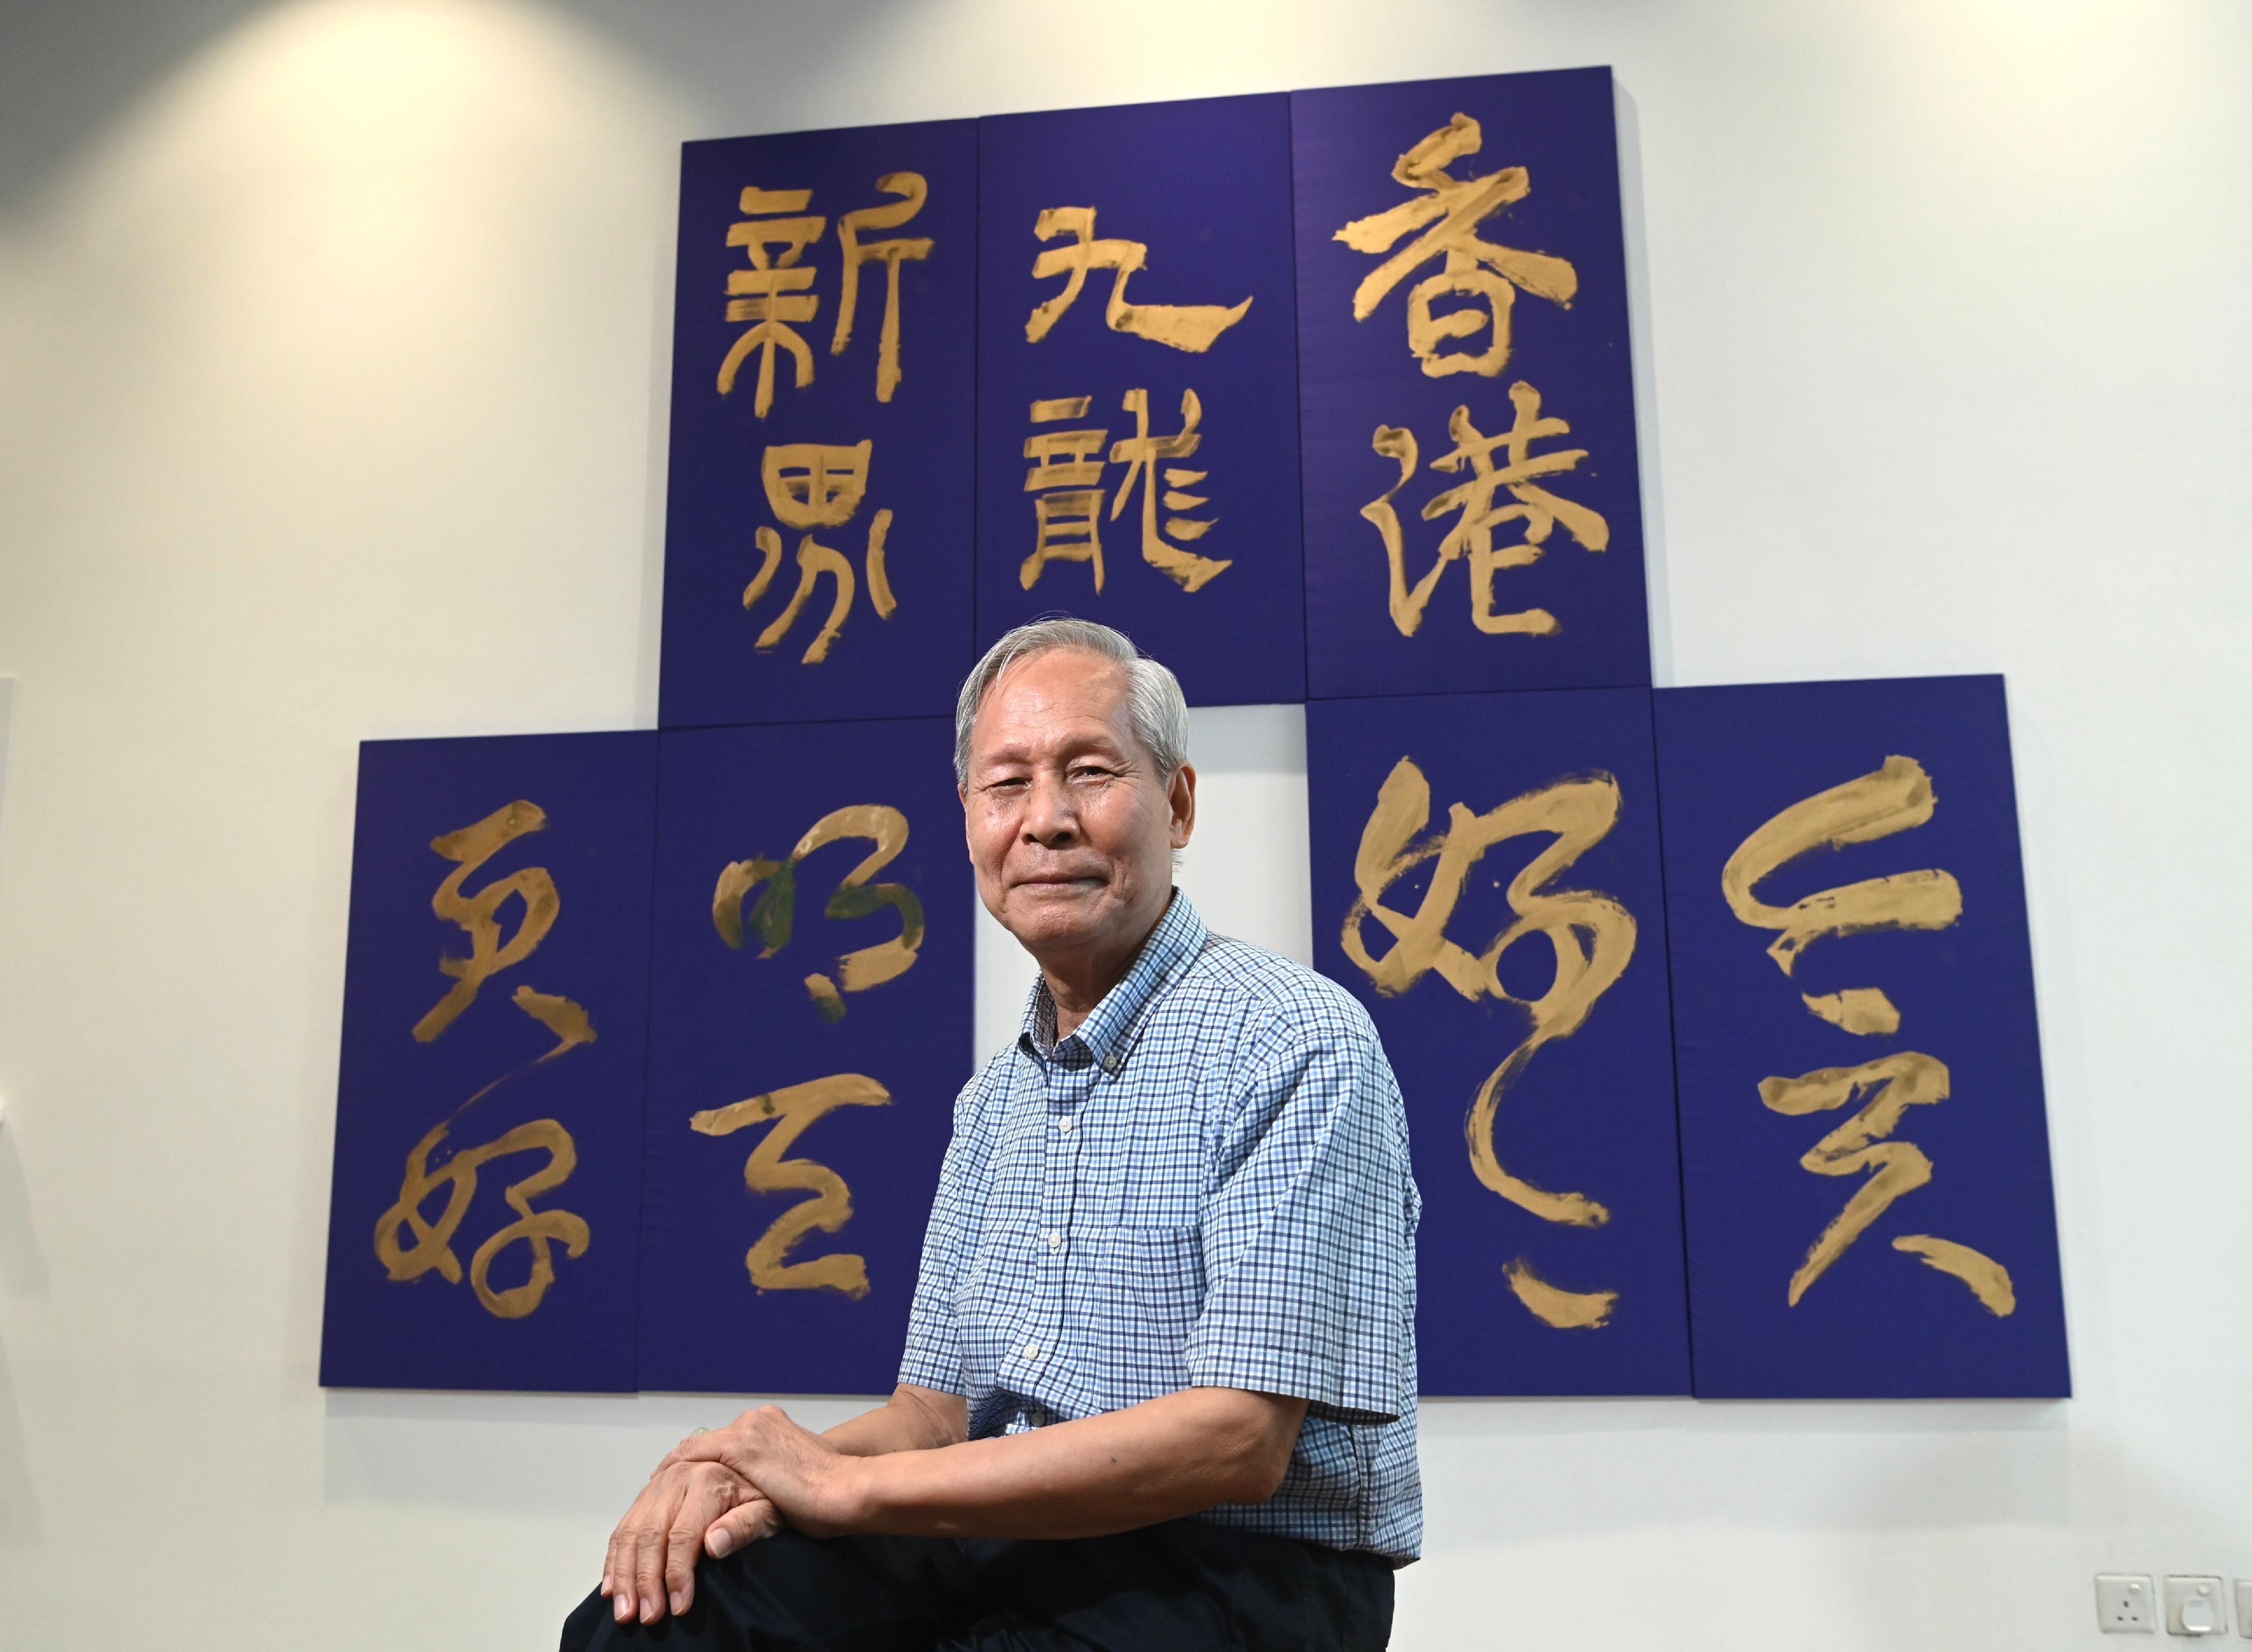 The "Archaic Curator Series: Kings' Inscriptions‧Contemporary Interpretations" exhibition will be open to the public from tomorrow (September 28) at Oi! Glassie. Photo shows artist Lee Yun Woon and his gold ink calligraphy on purple fabric, "Blessings to Hong Kong".